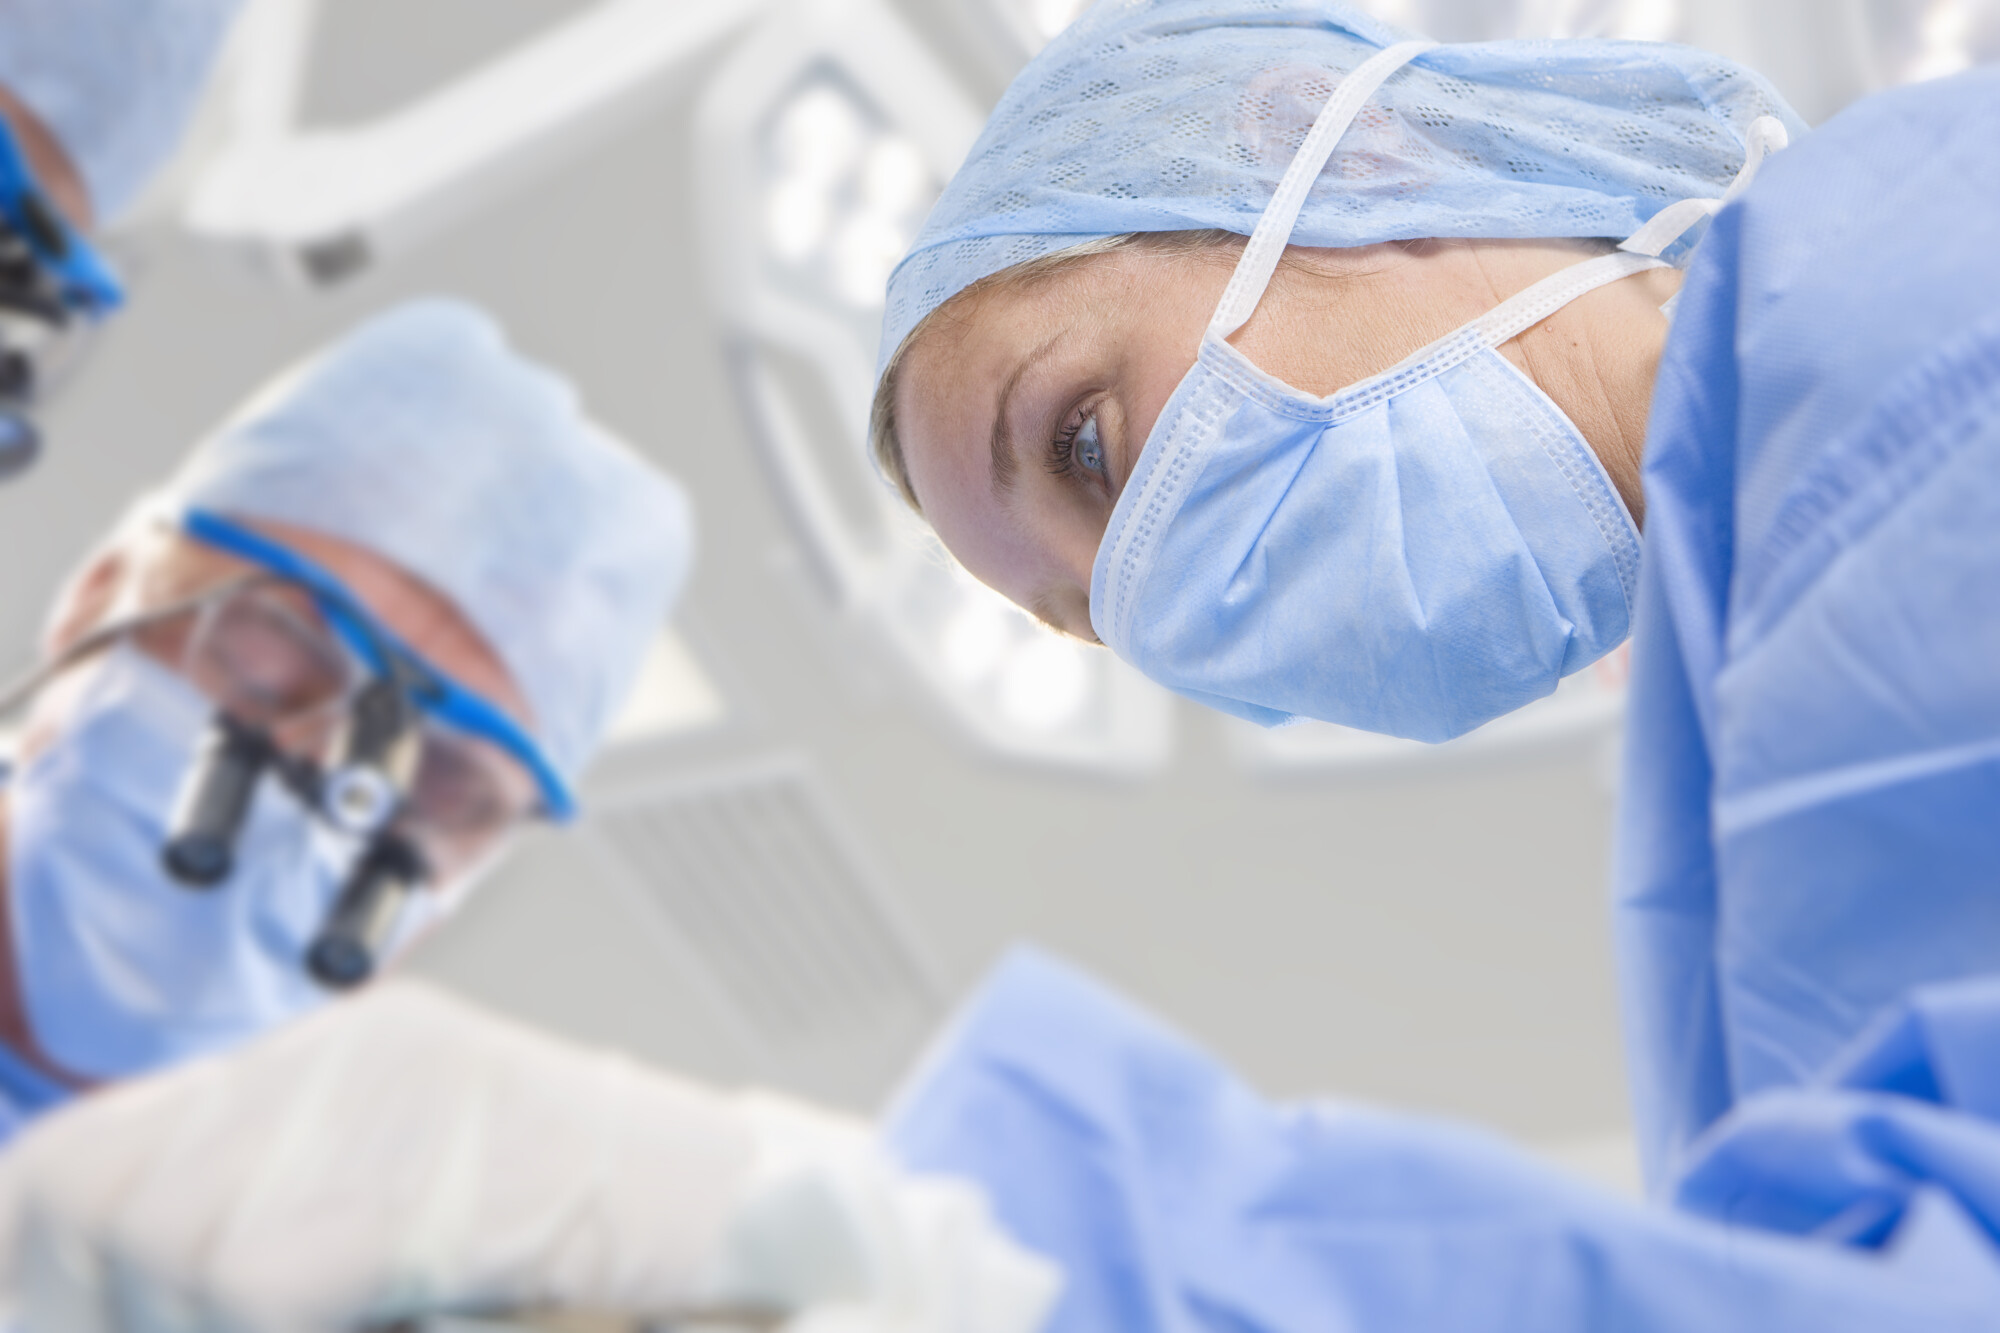 Choosing a Shoulder Surgeon for Your Personal Injury Case